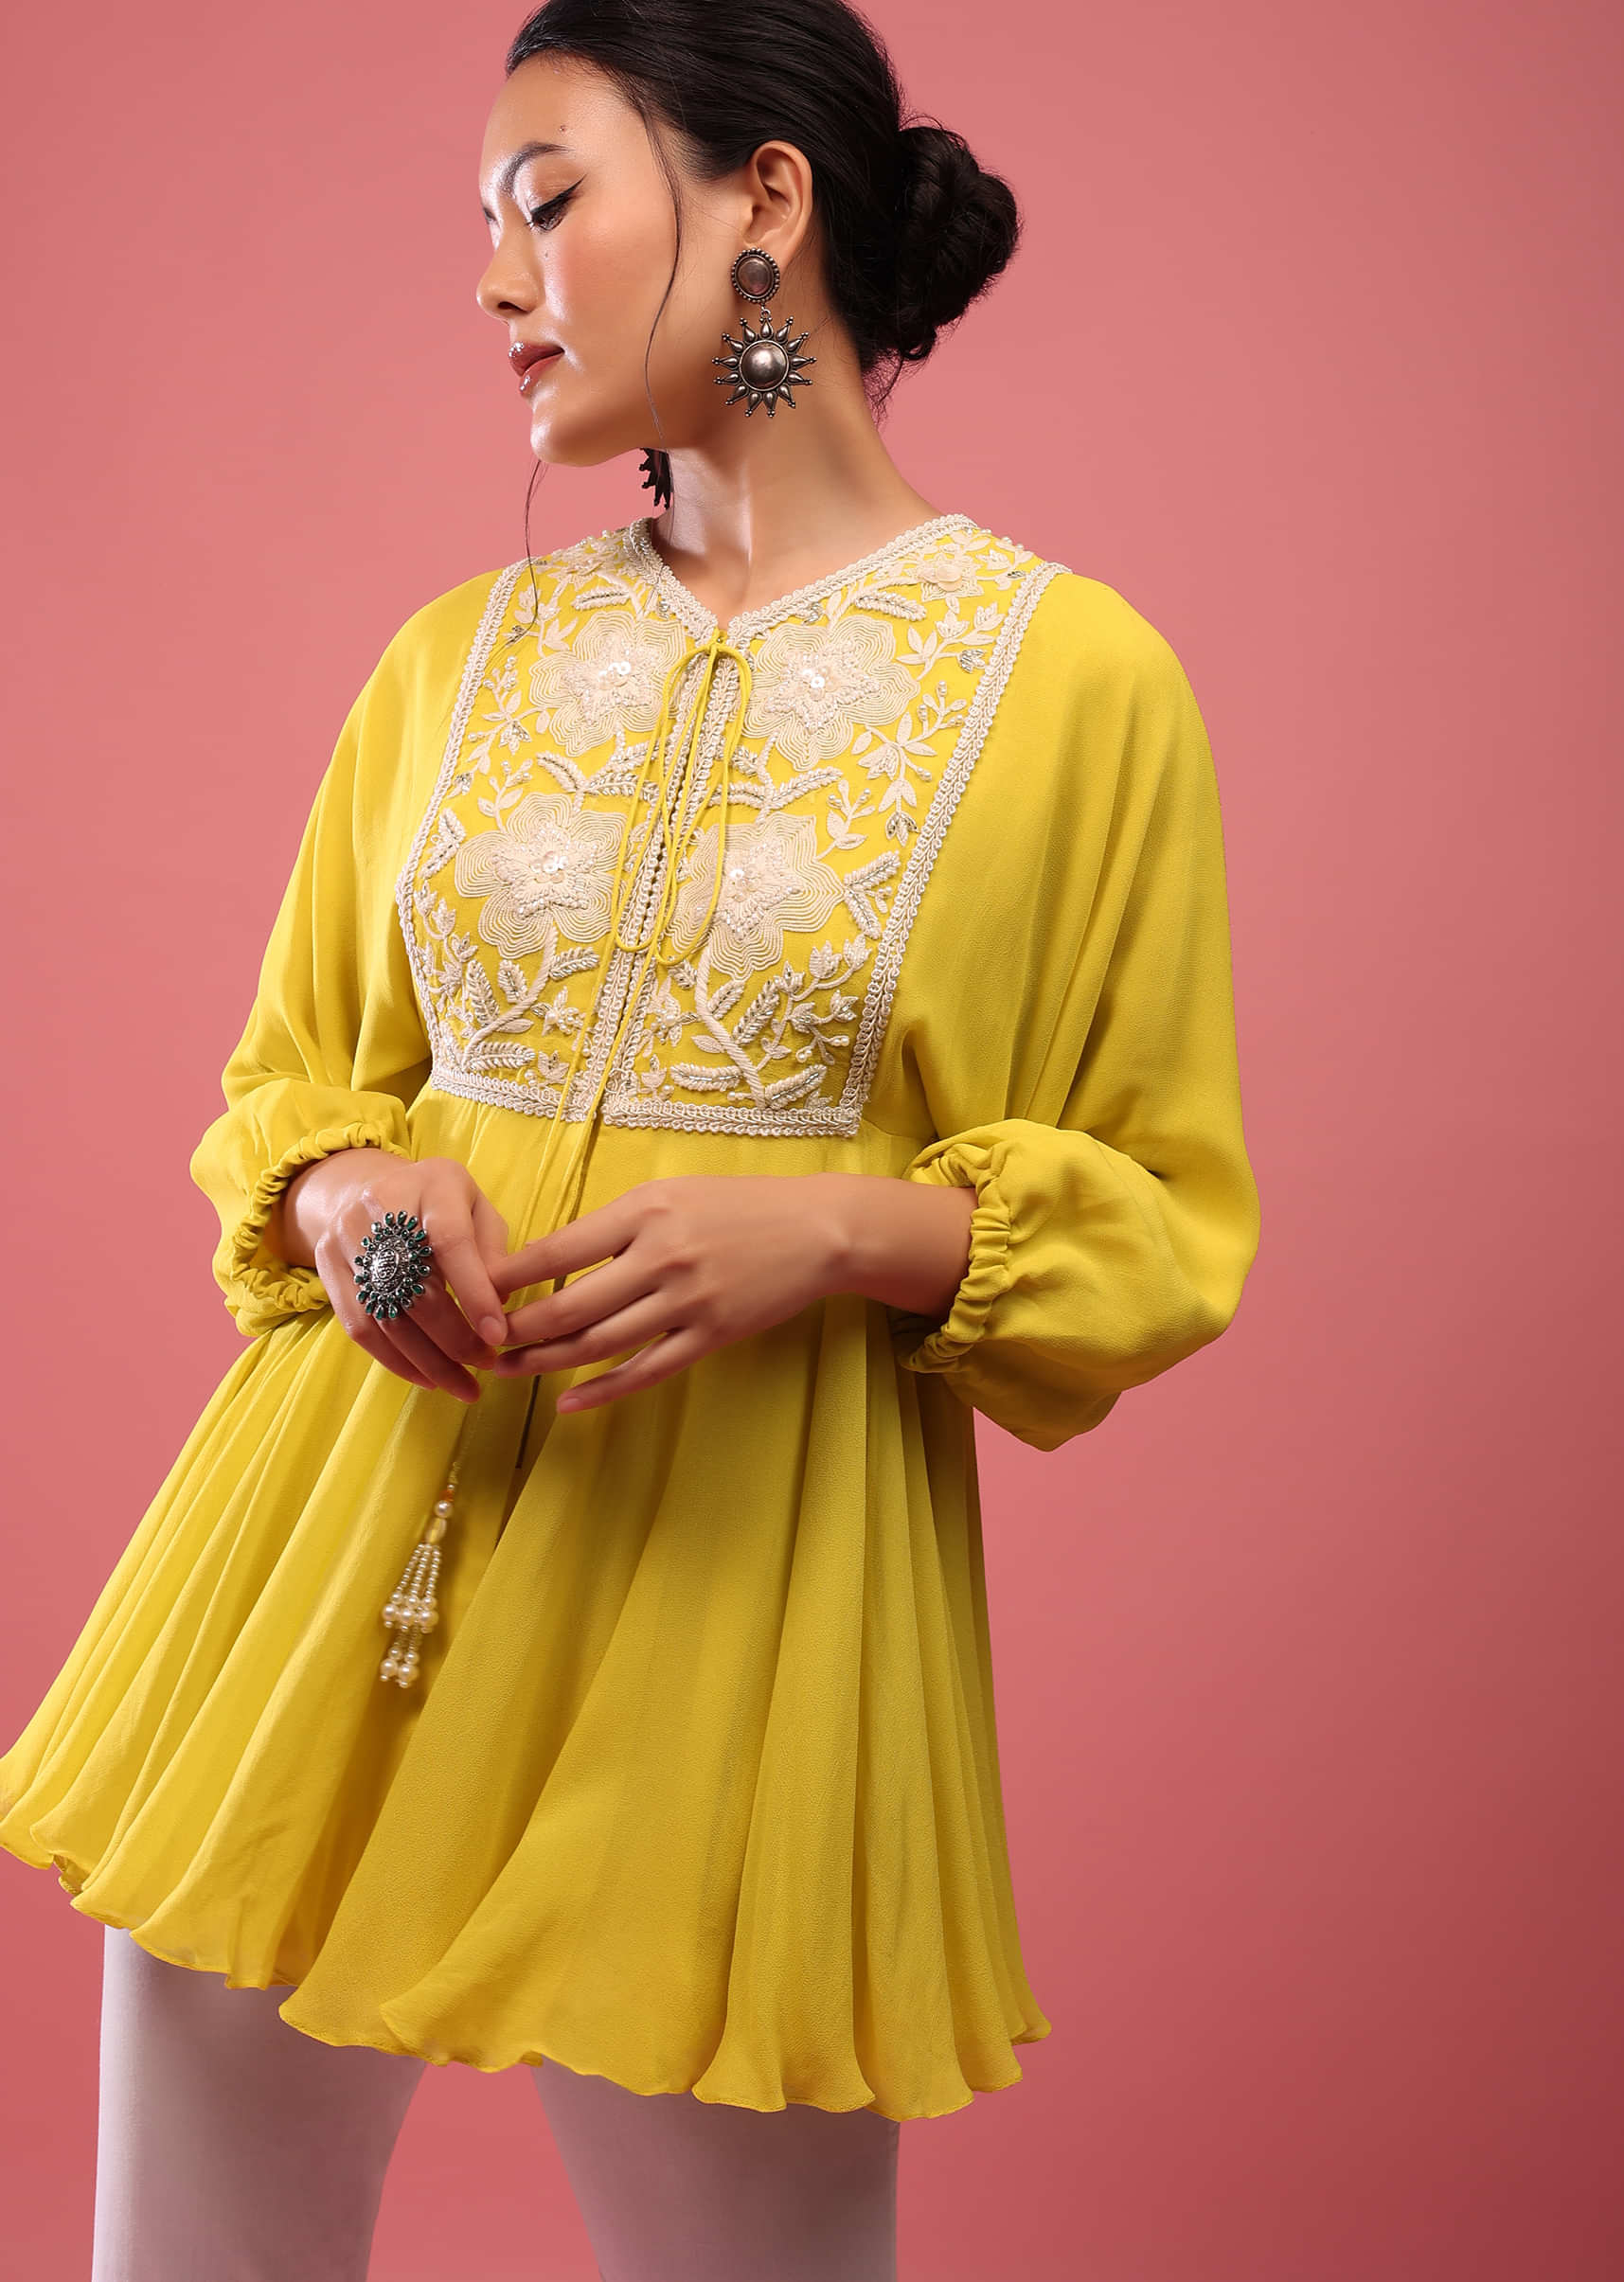 Cyber Yellow Top And Pant Set In Georgette With Empire Line Cut And Embroidery